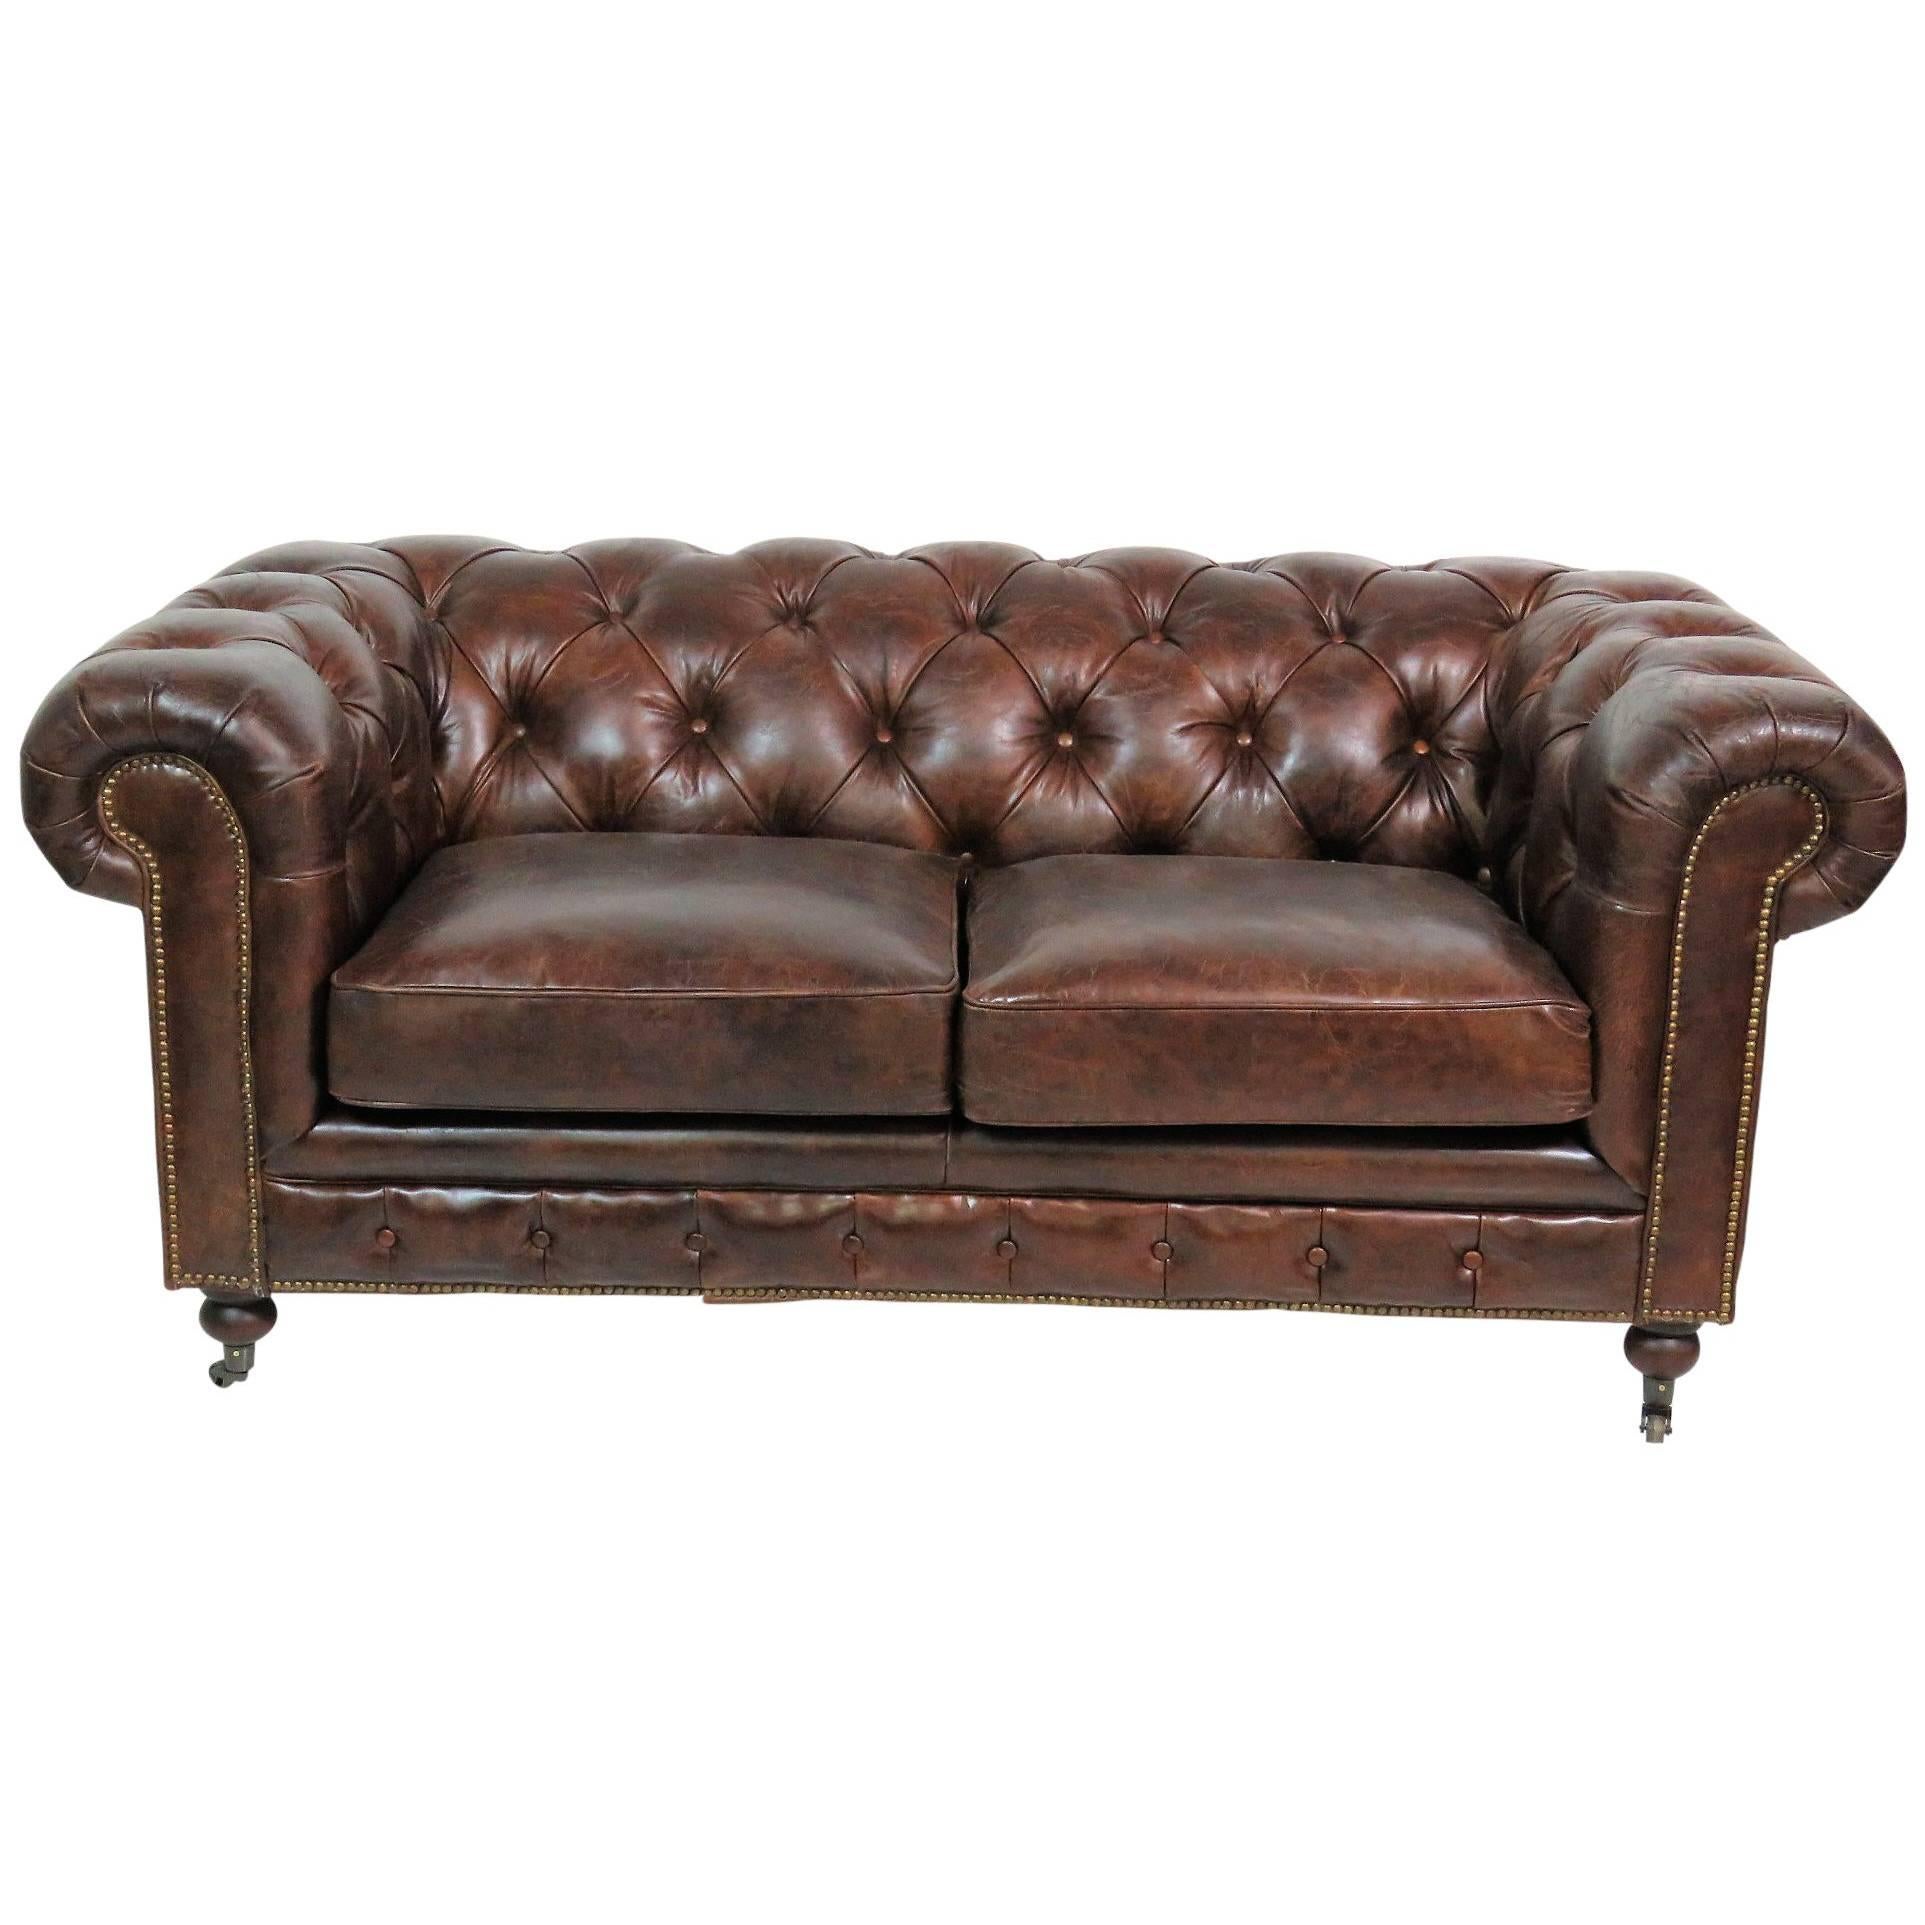 Georgian Style Brown Leather Tufted Chesterfield Sofa